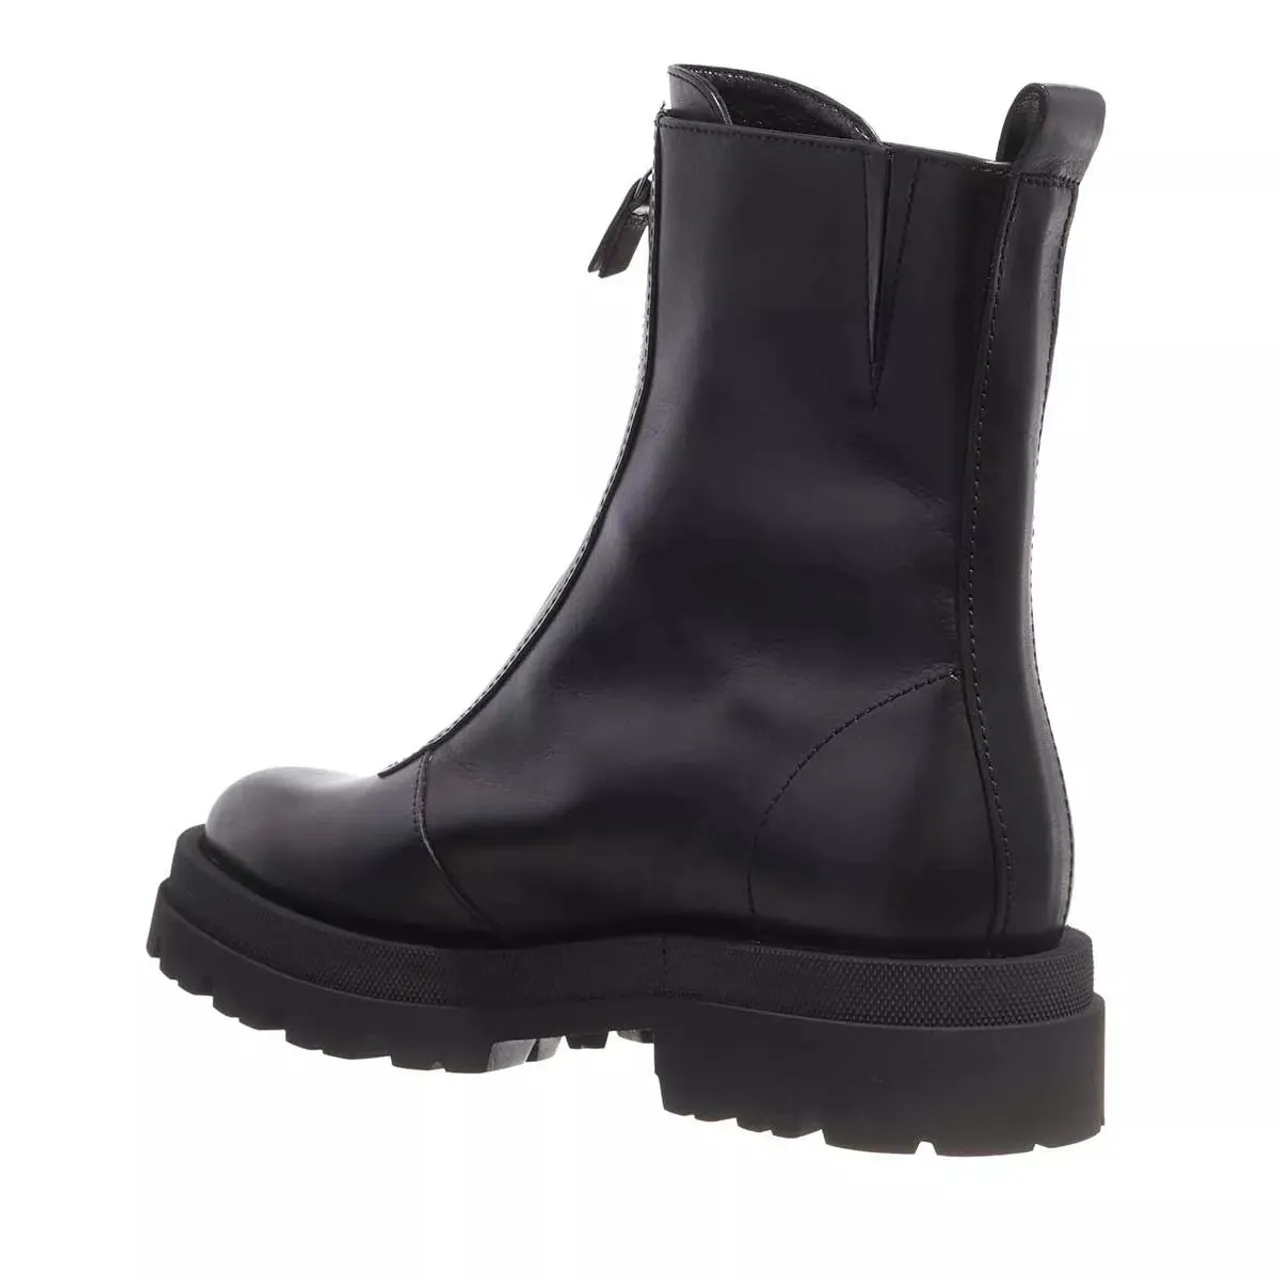 Kennel & Schmenger Boots & Stiefeletten - Shade Boots Leather